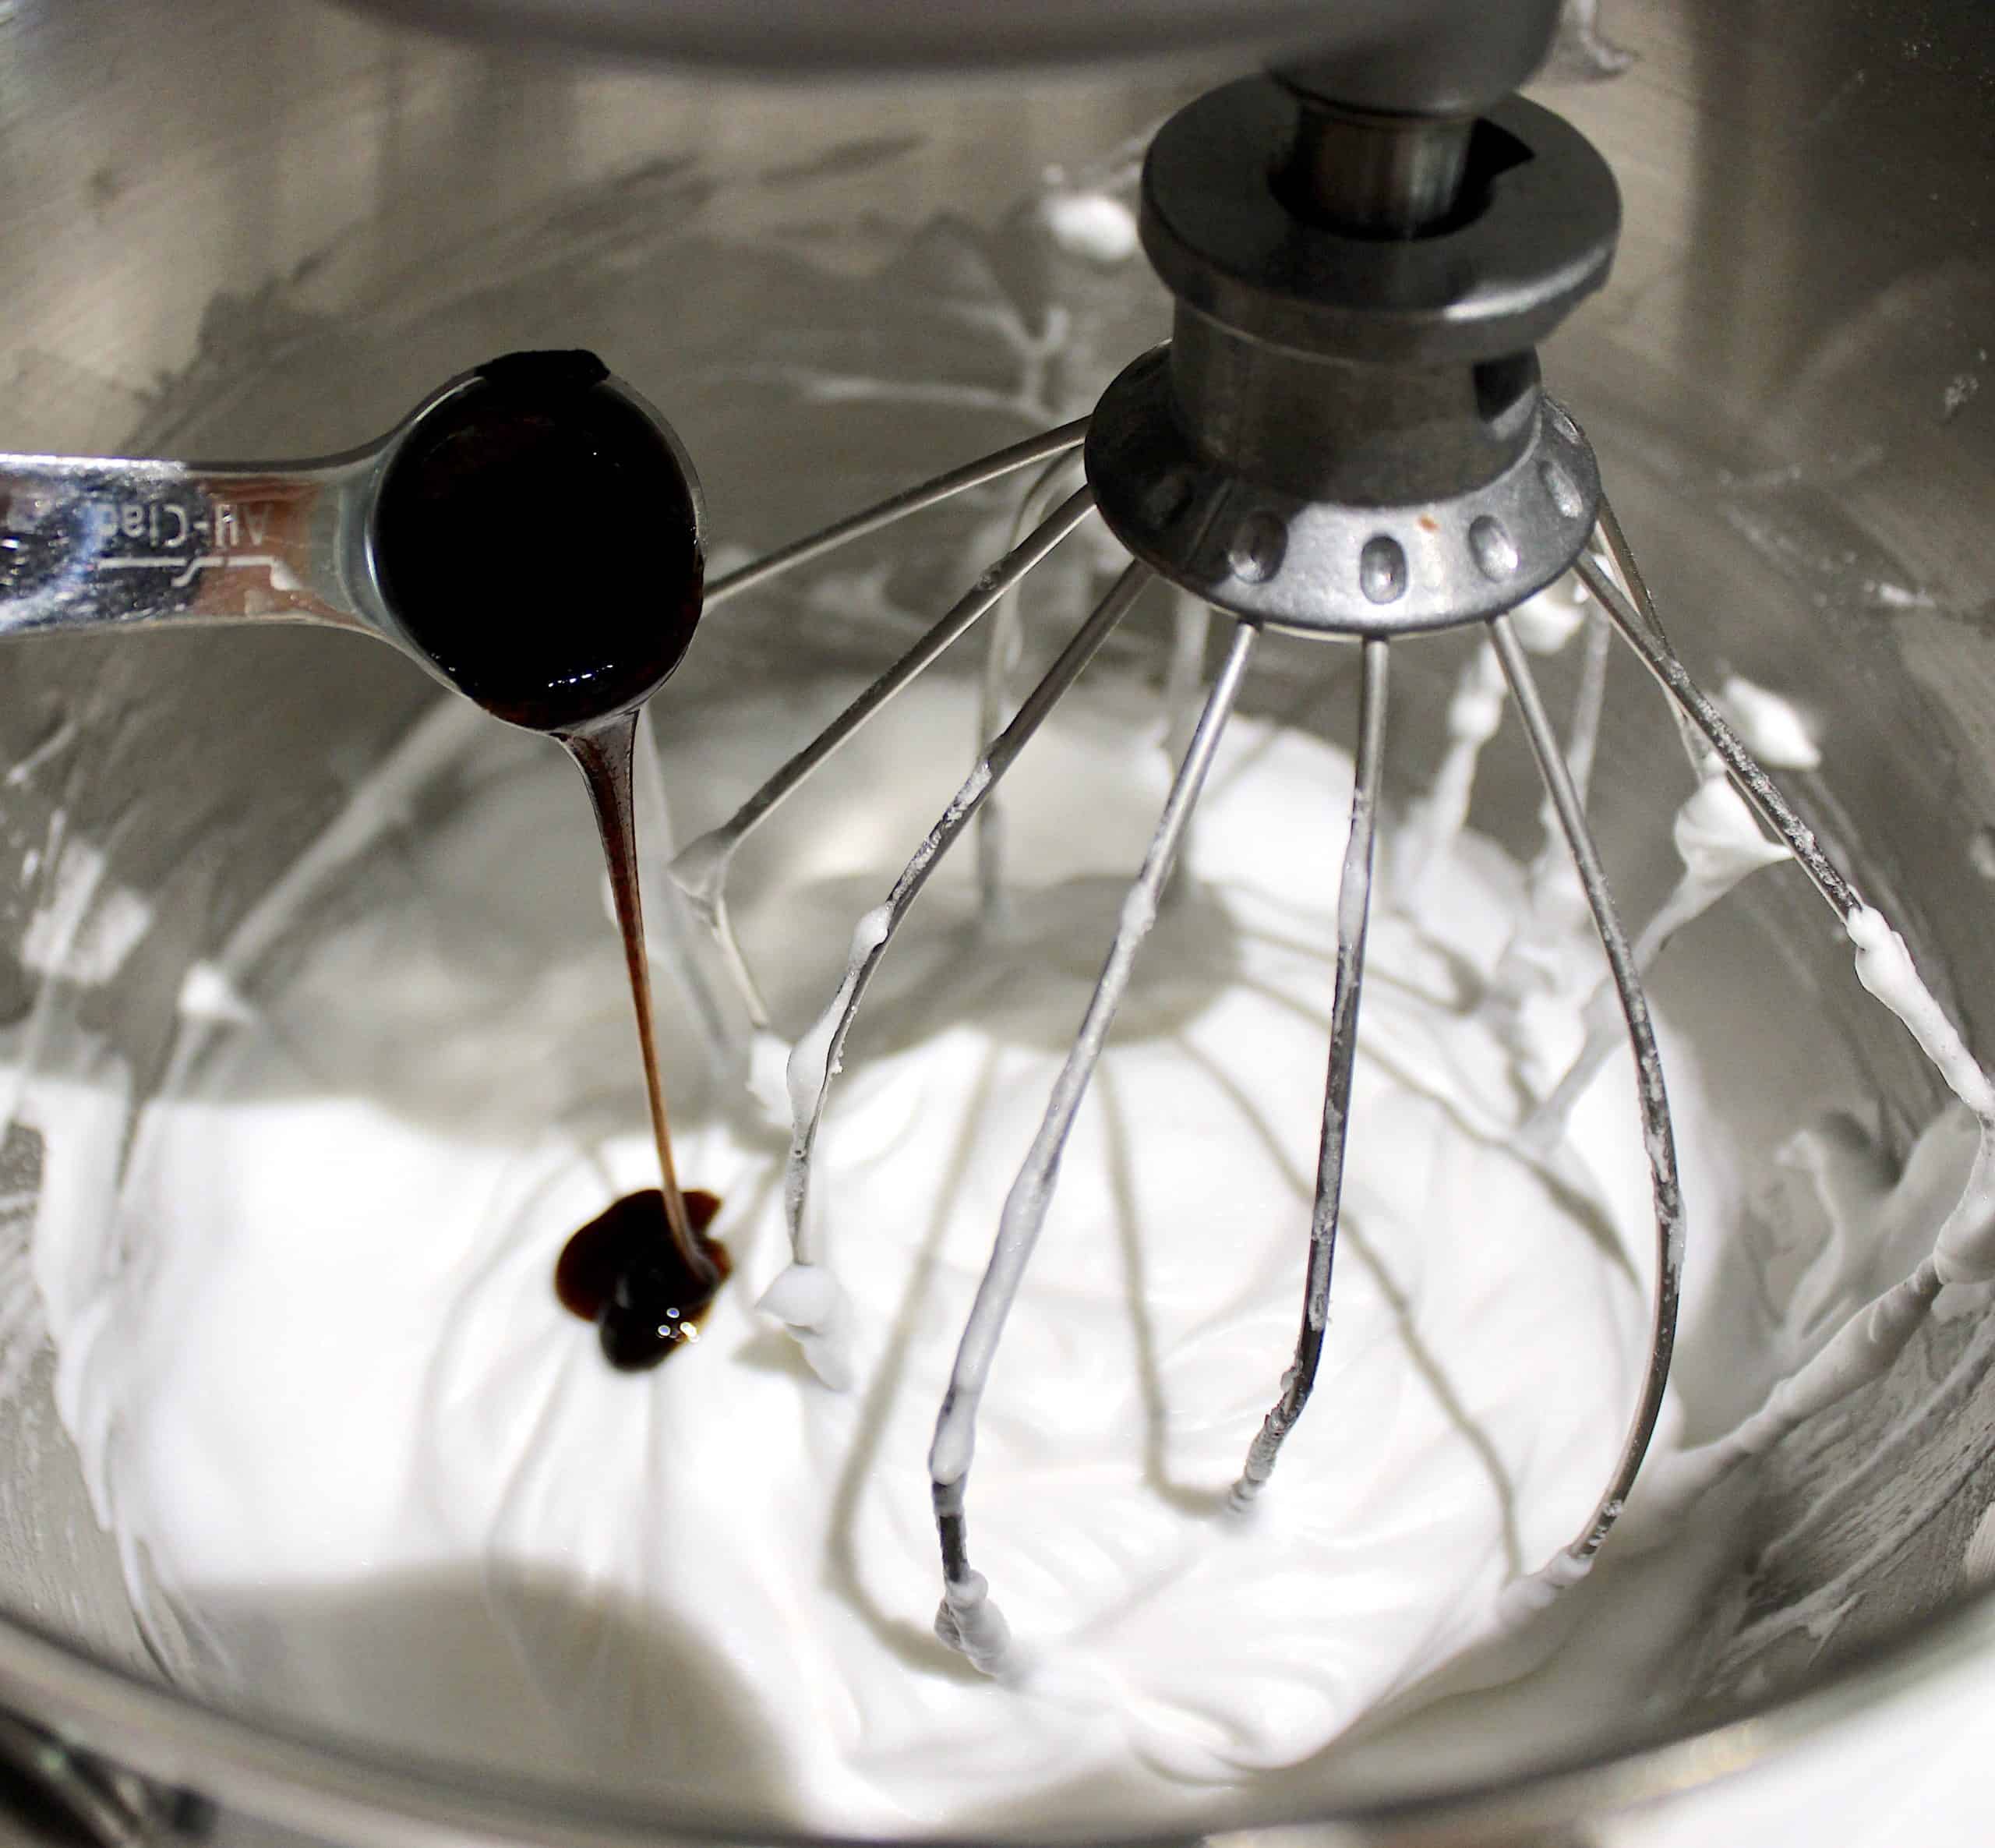 vanilla bean paste being poured into whipped egg whites in stand mixer